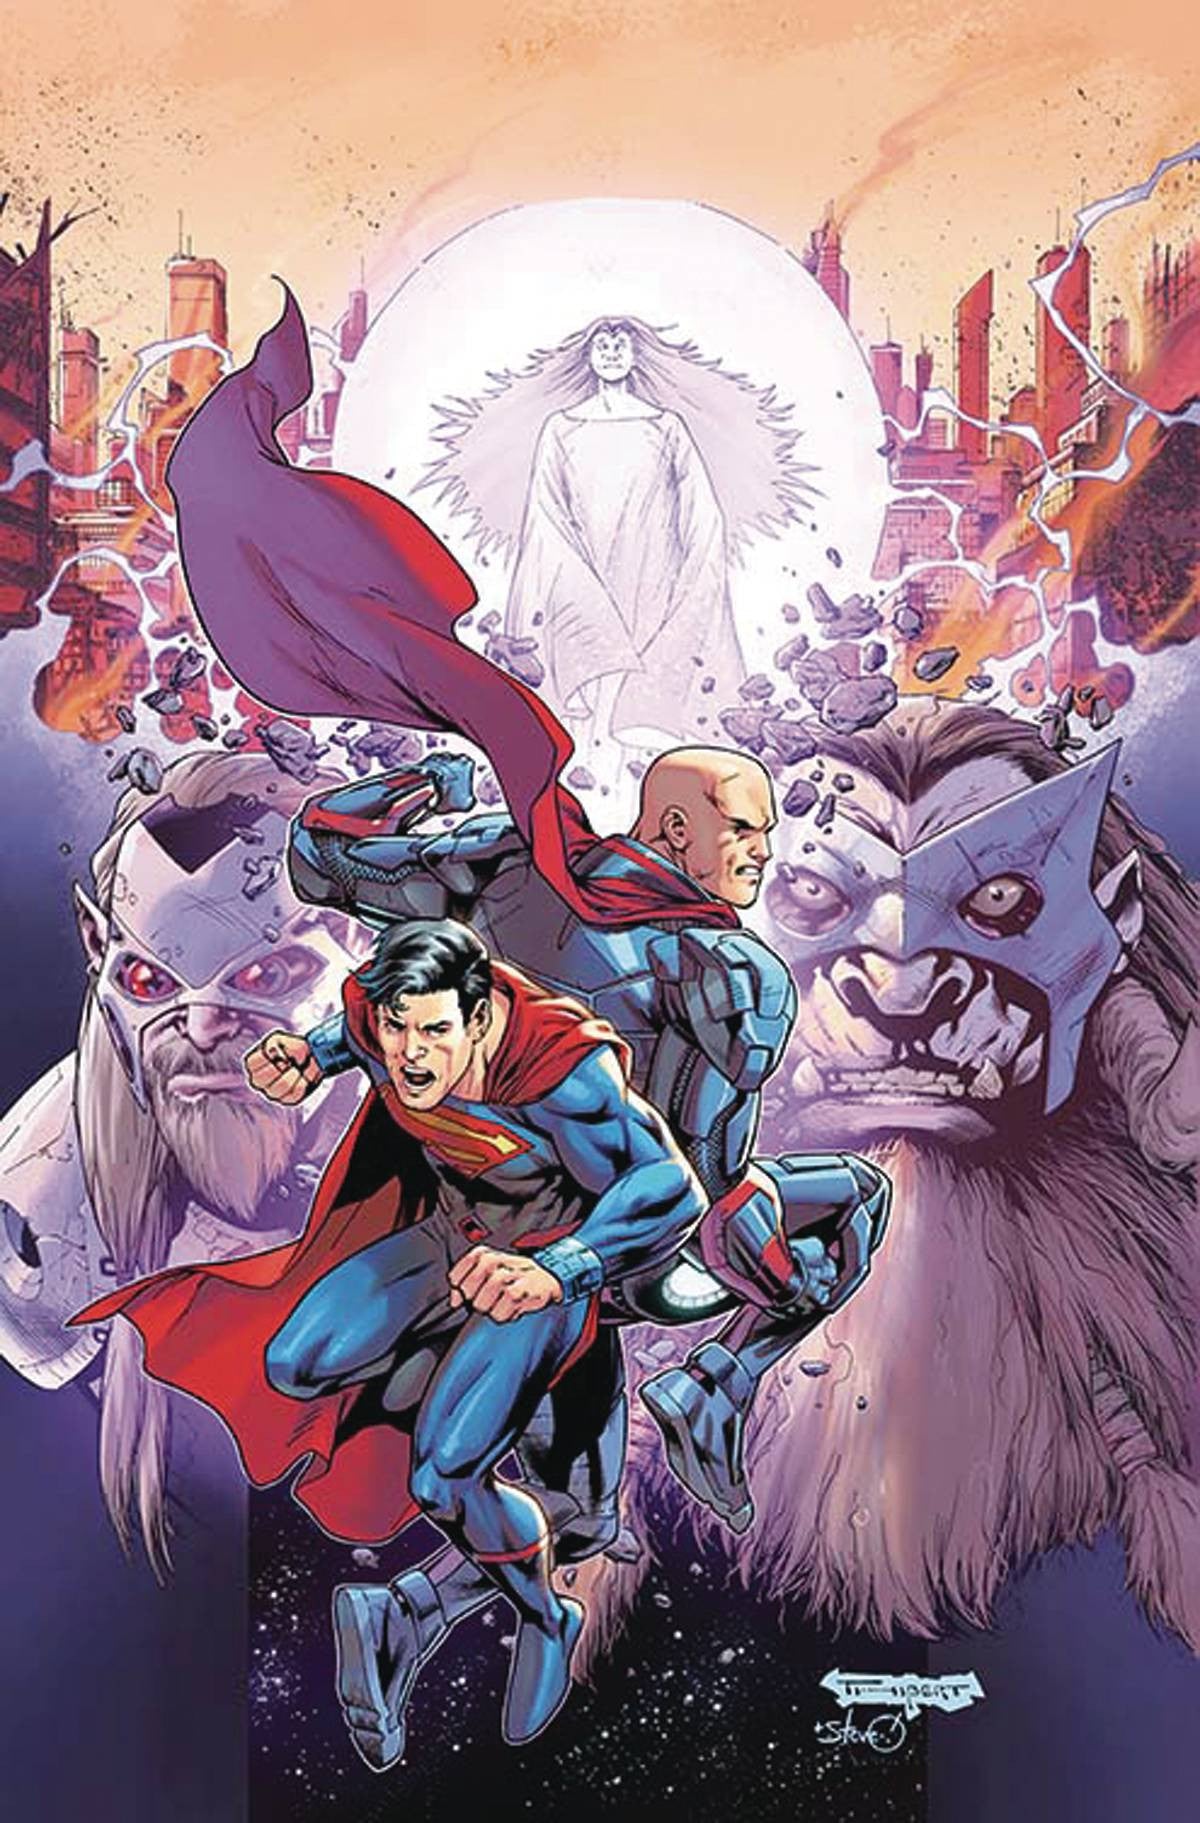 ACTION COMICS #972 COVER